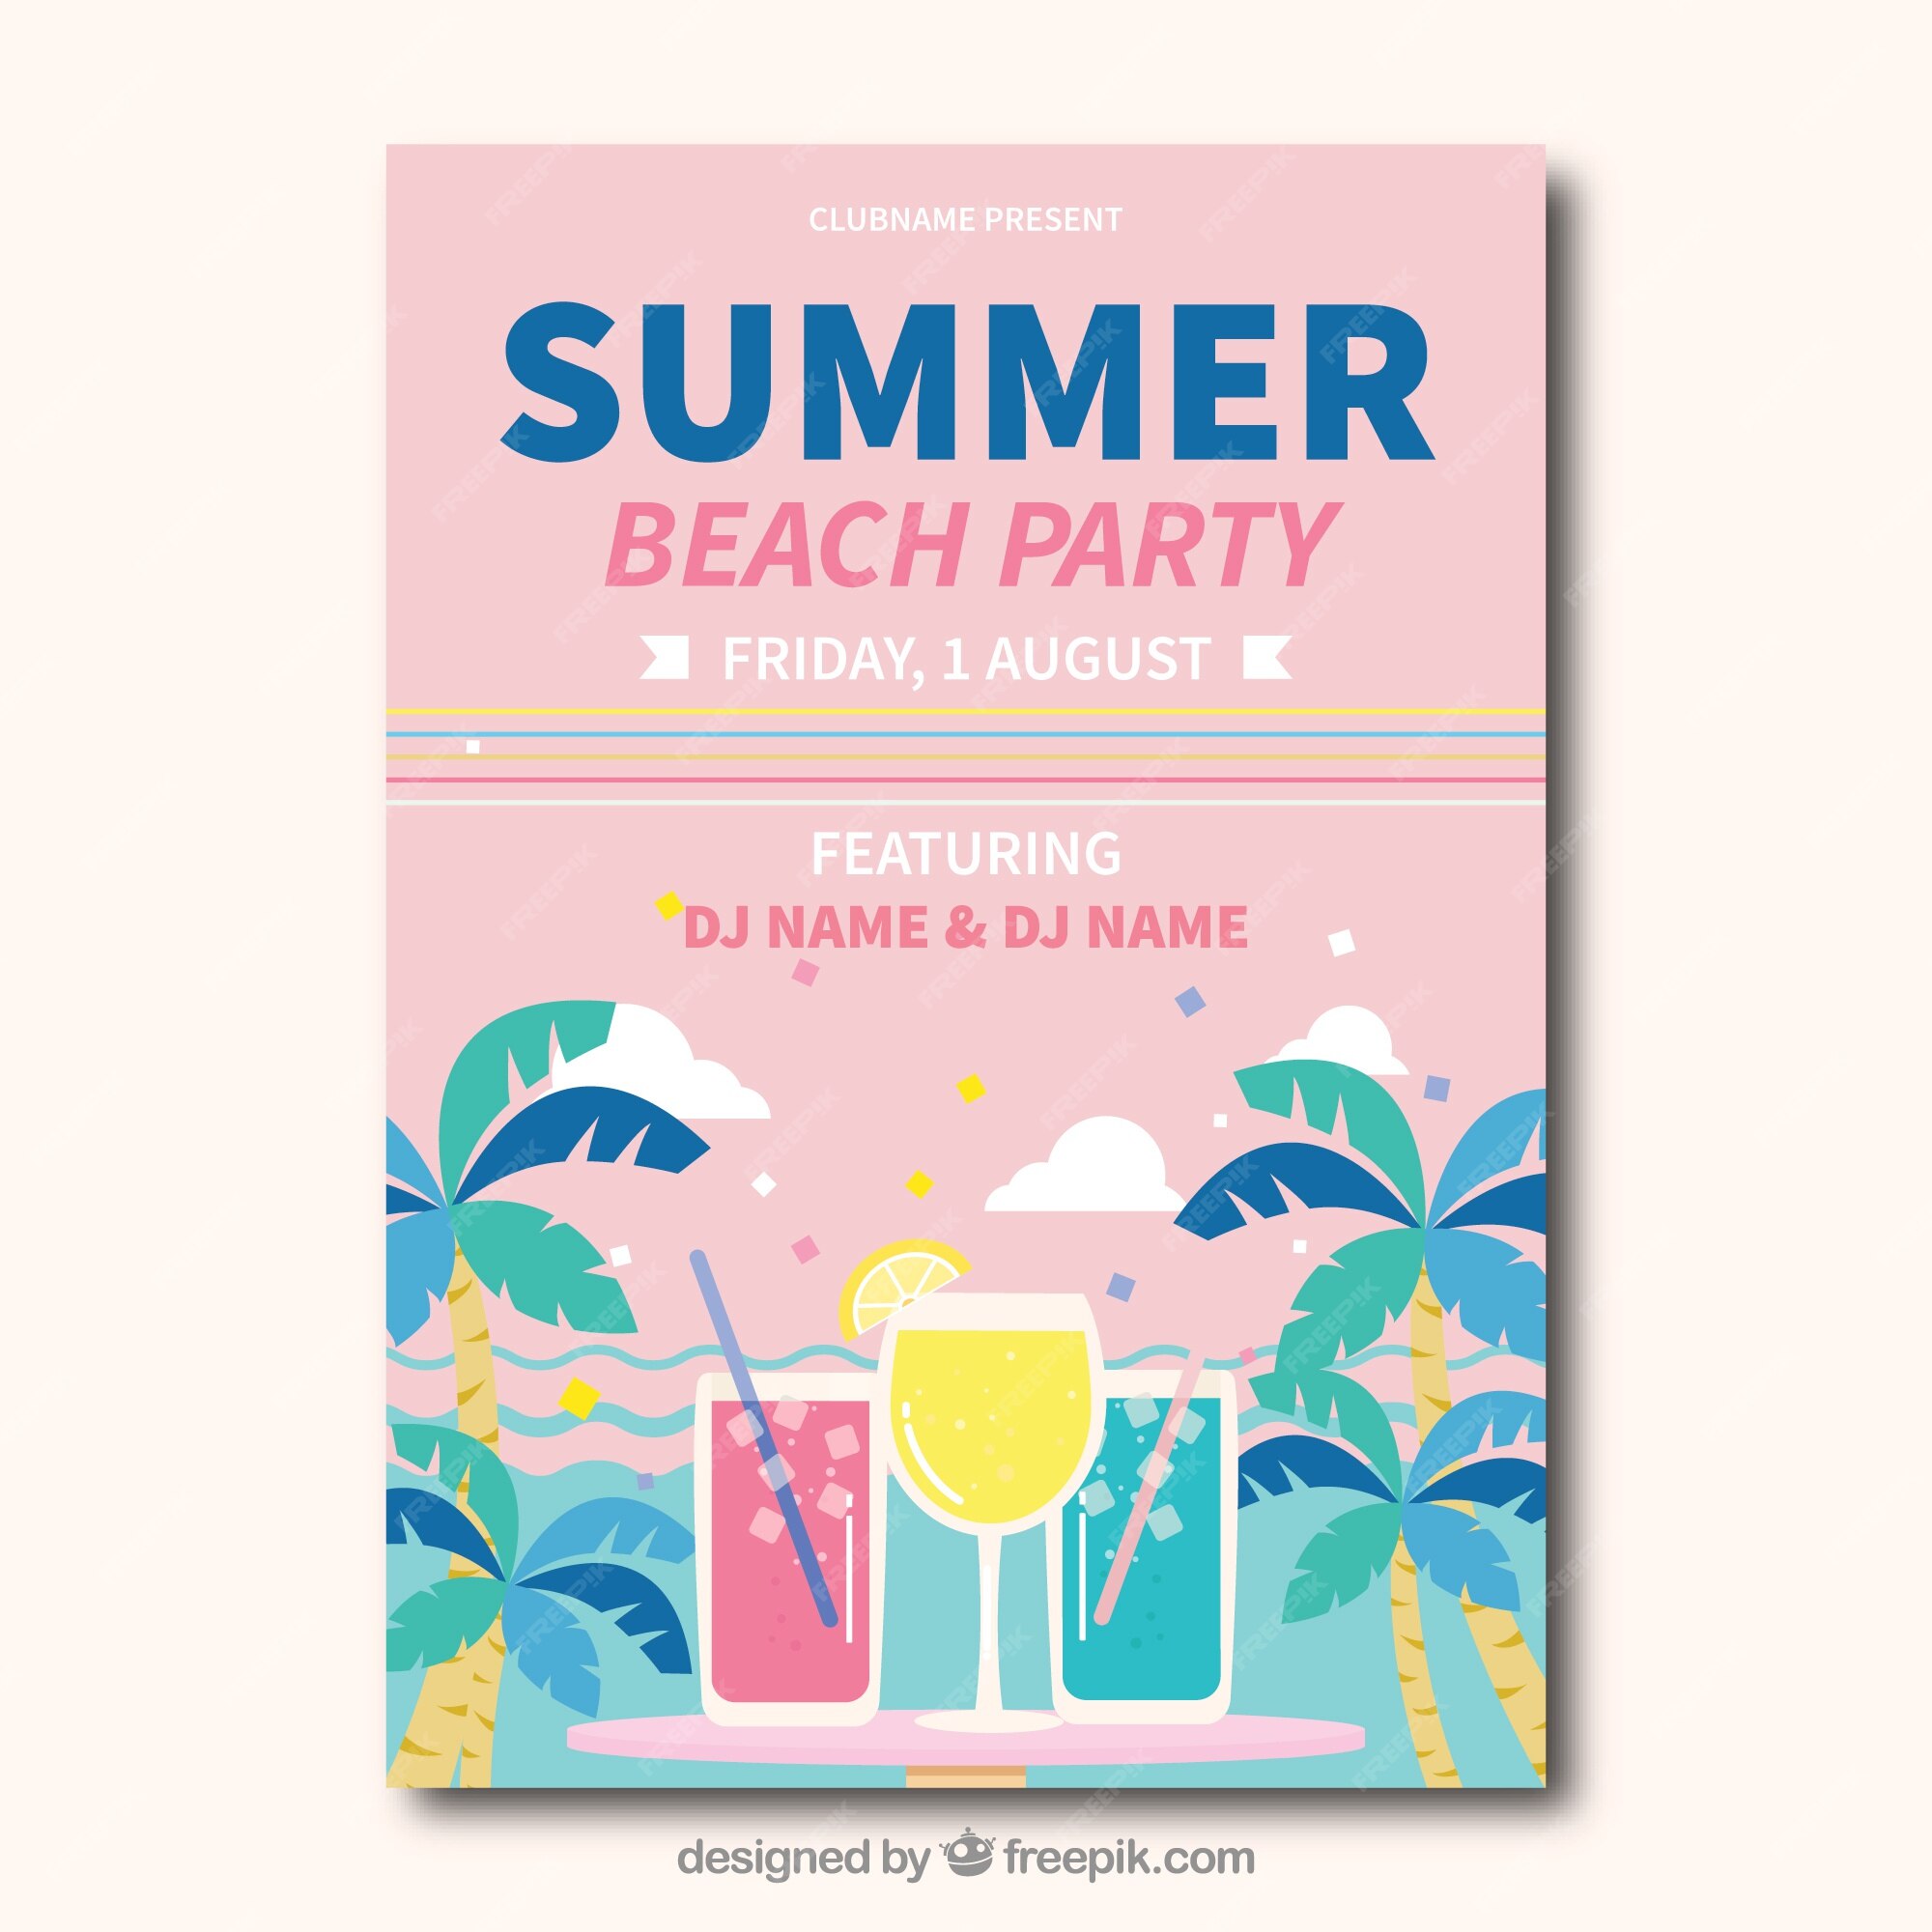 Free Vector | Beach party card in pastel tones